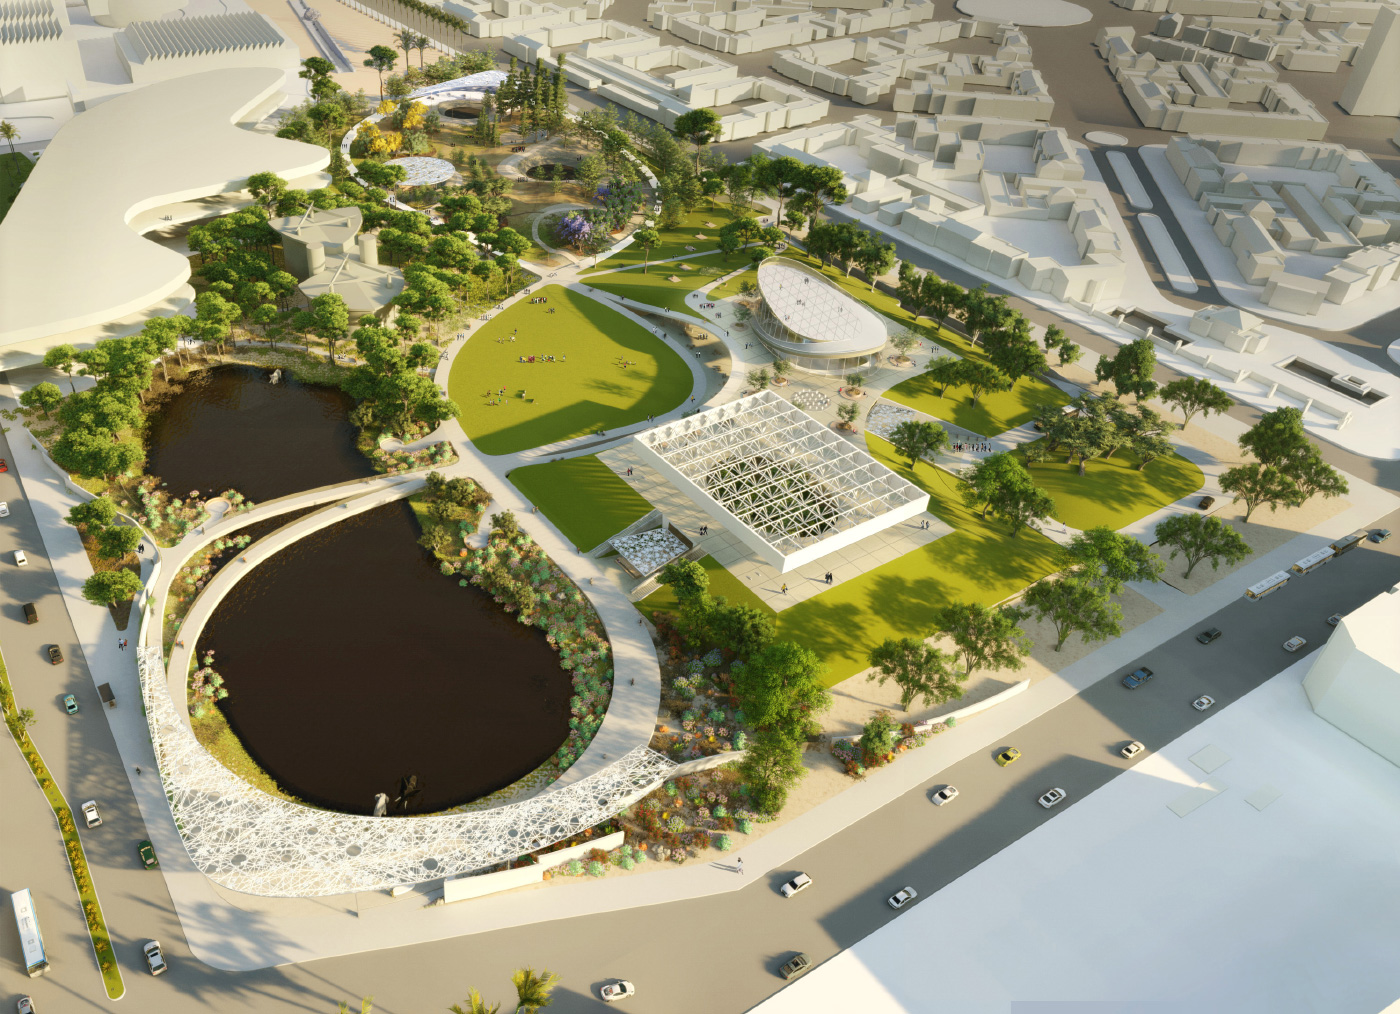 Aerial rendering of a loop system for the La Brea Tar Pits